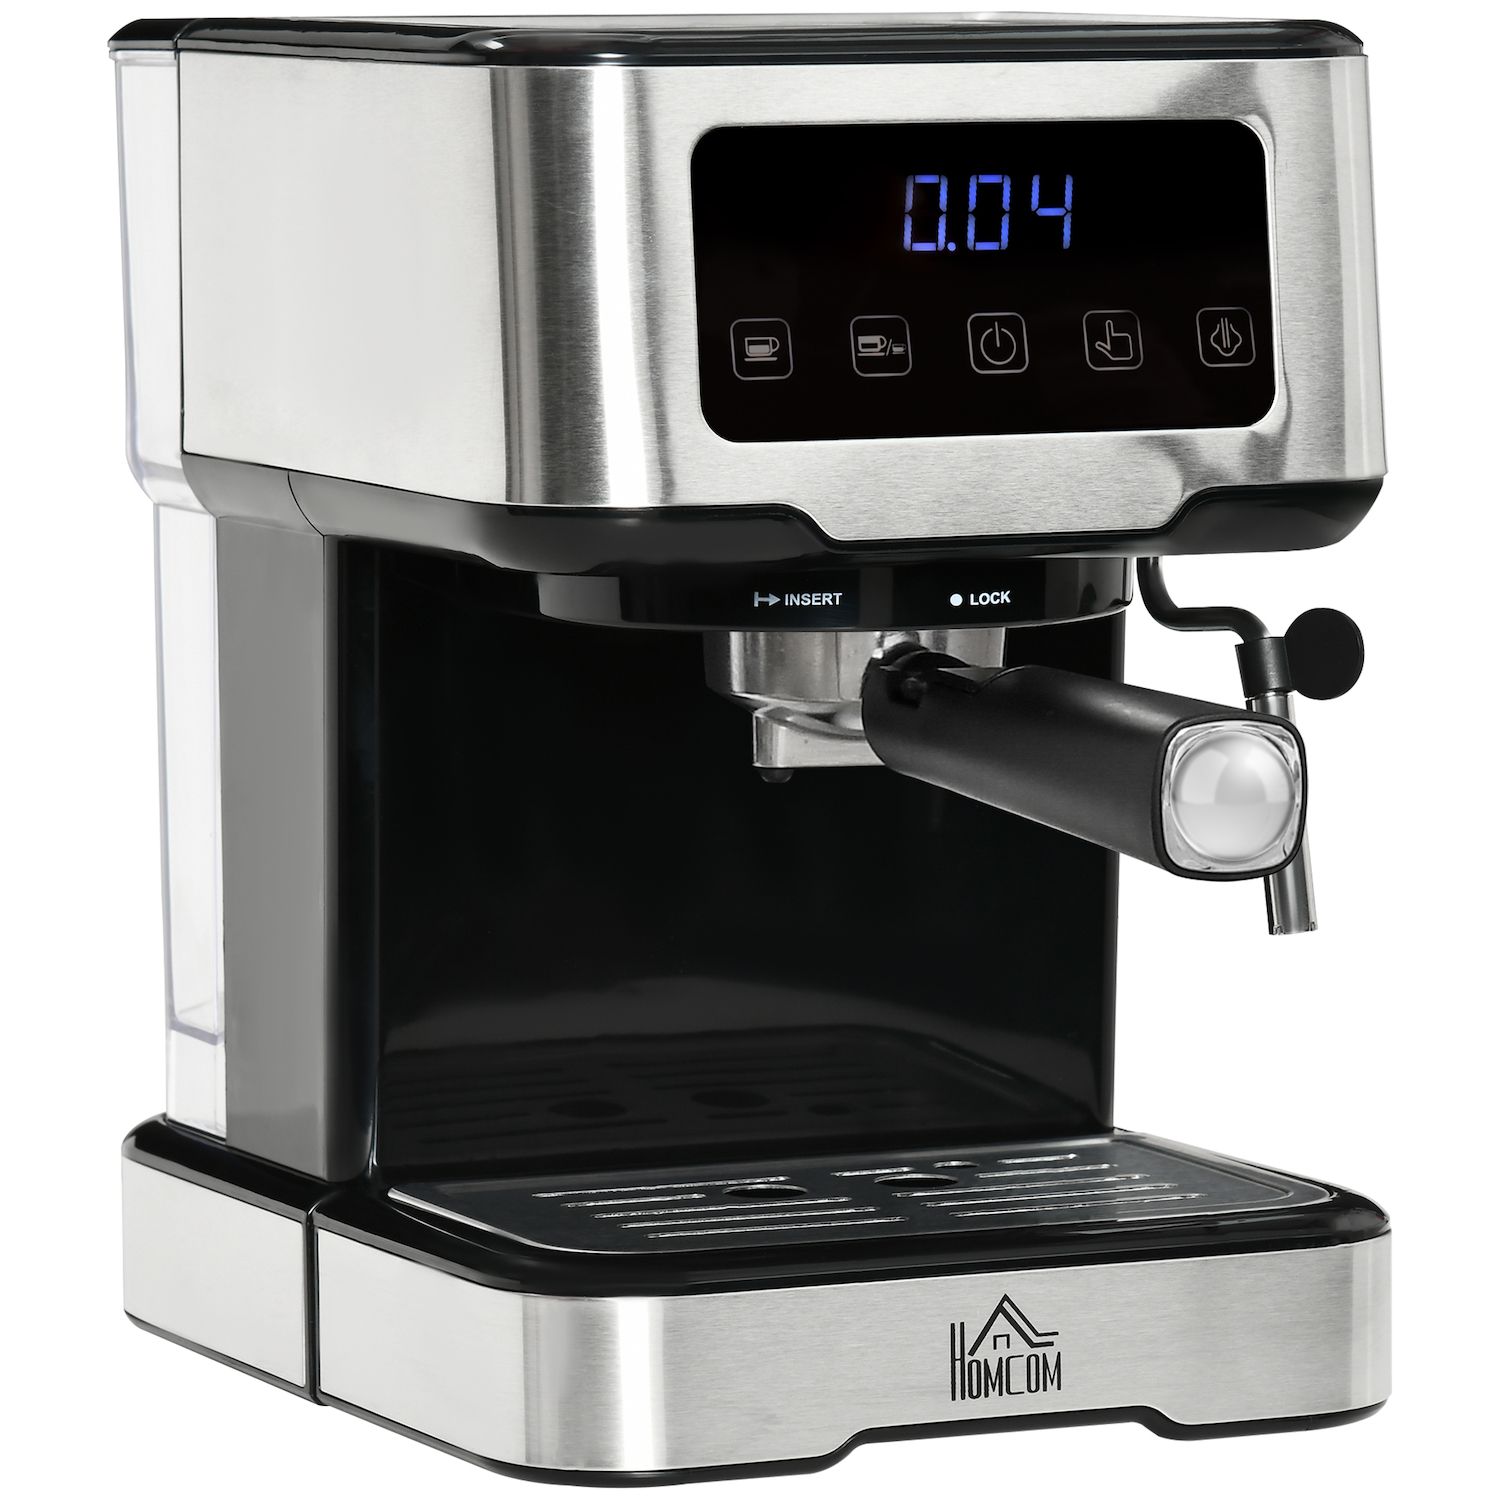 Zulay Magia Automatic Espresso Machine with Grinder - White, 1 - Foods Co.